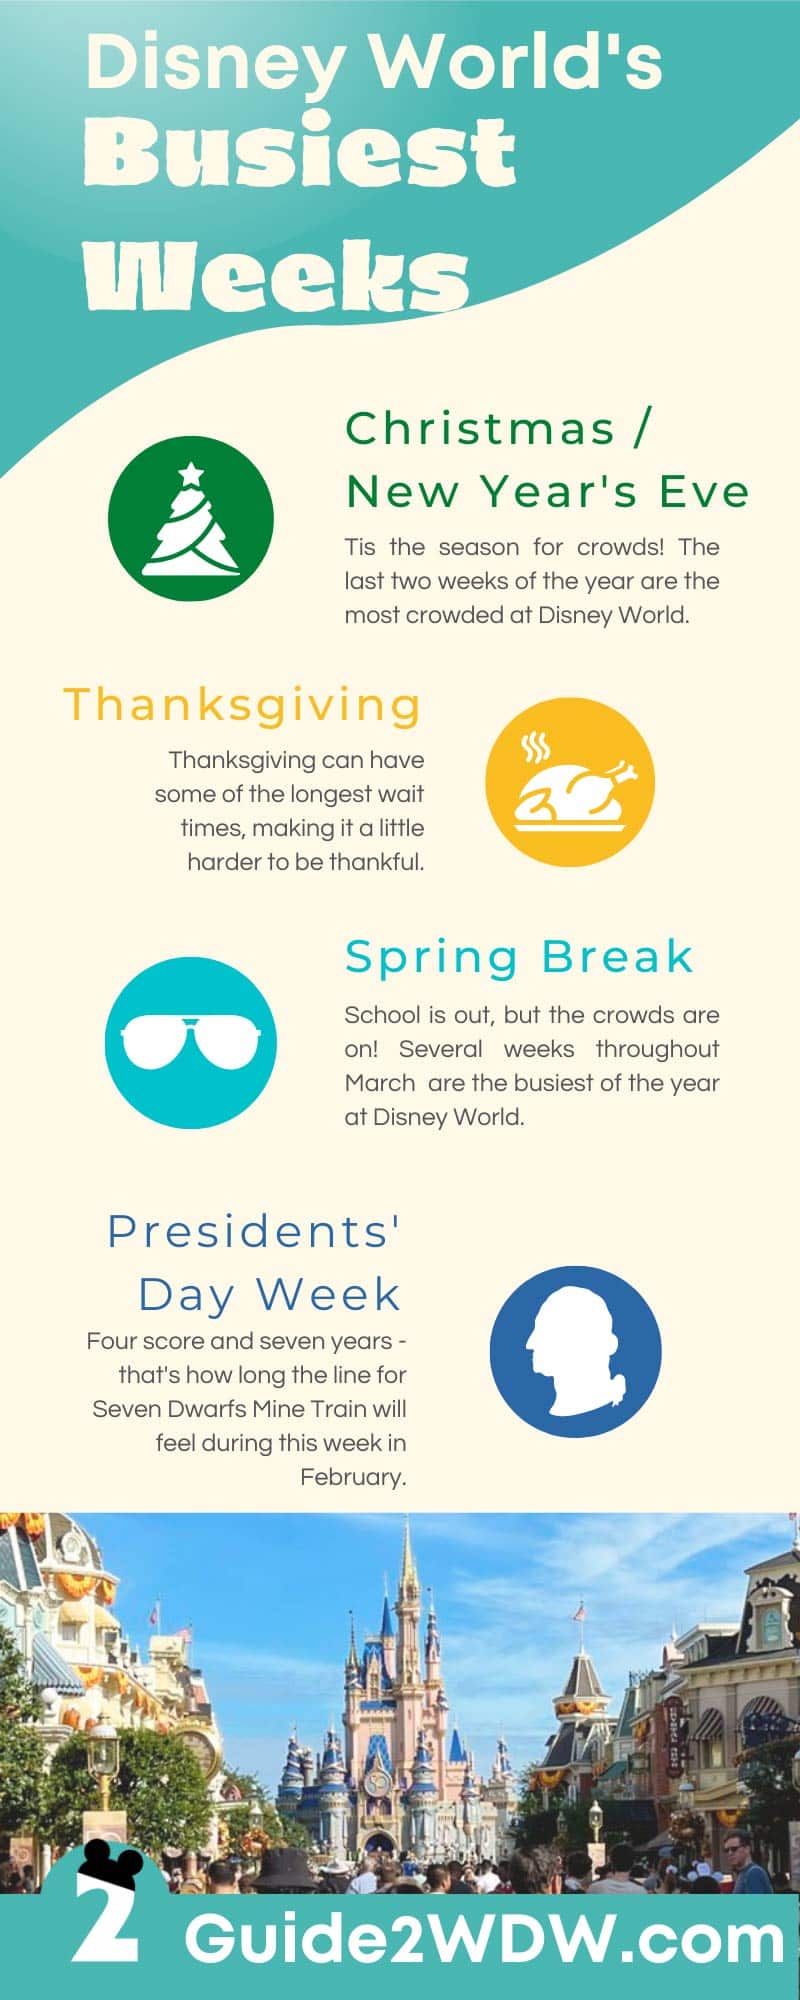 Infographic - The Busiest and Most Crowded Weeks at Disney World - Guide2WDW